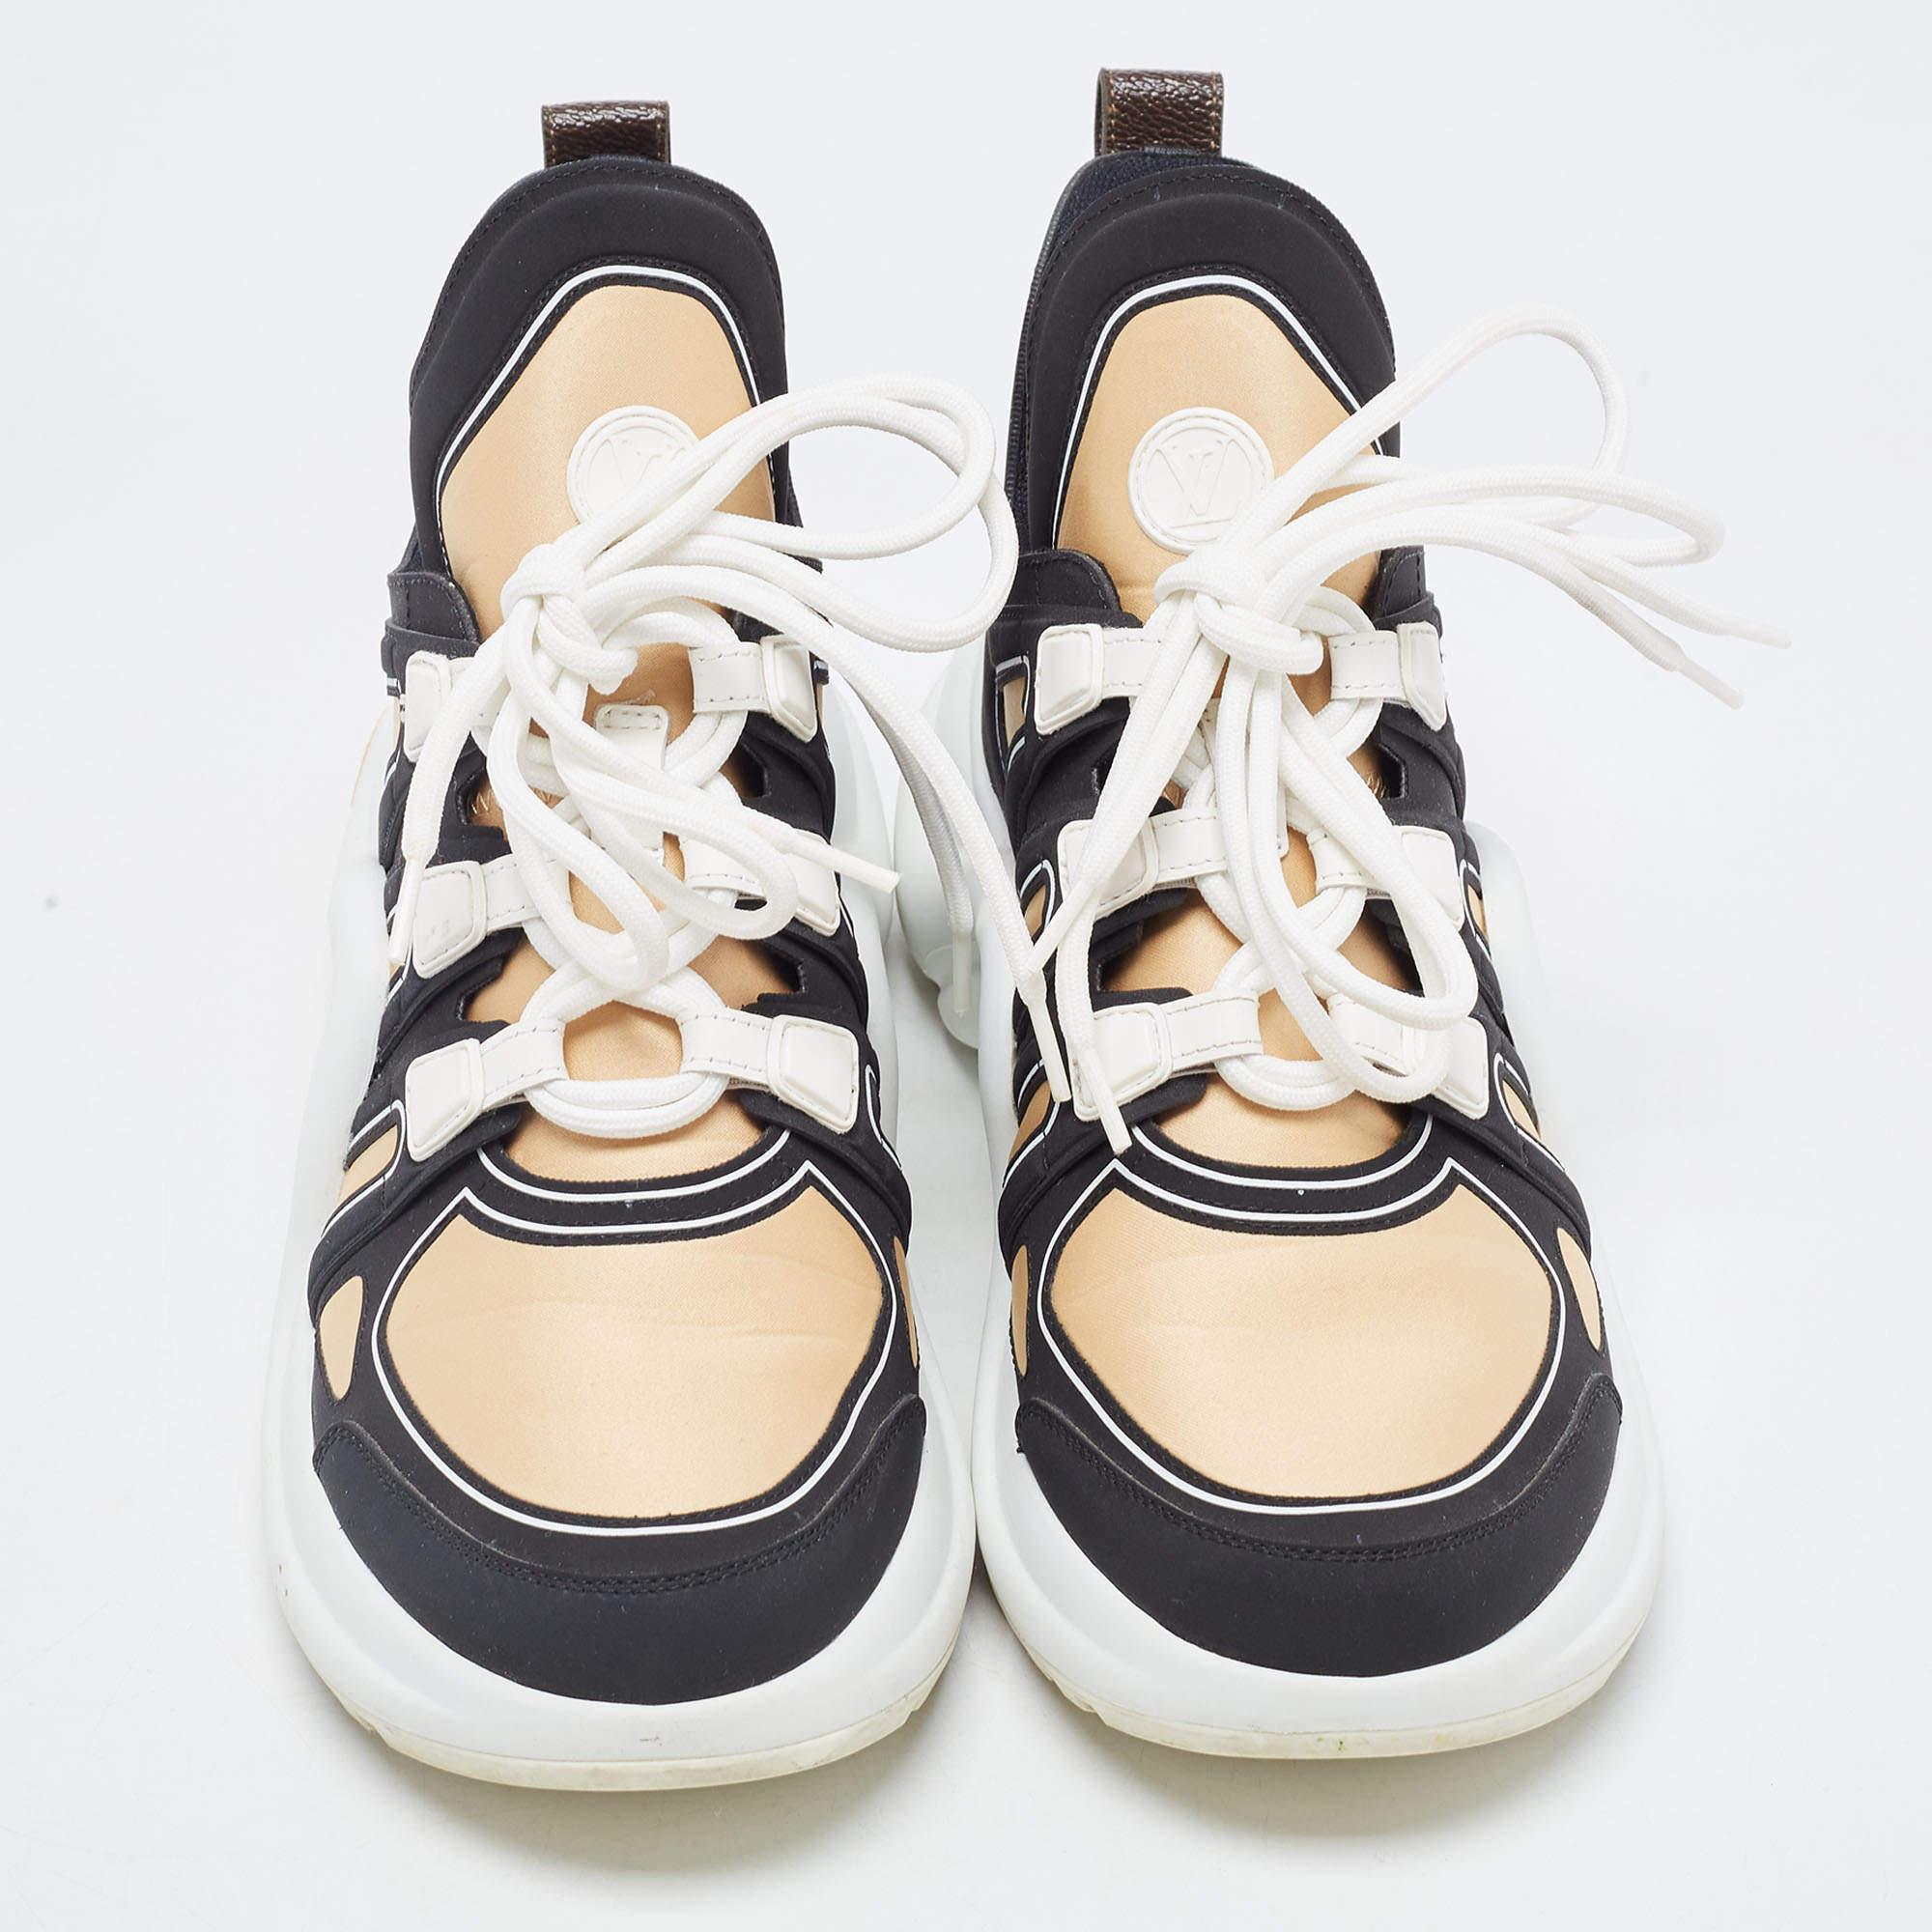 Give your outfit a luxe update with this pair of LV sneakers. The shoes are sewn perfectly to help you make a statement in them for a long time.

Includes: Original Dustbag, invoice, Original Box

